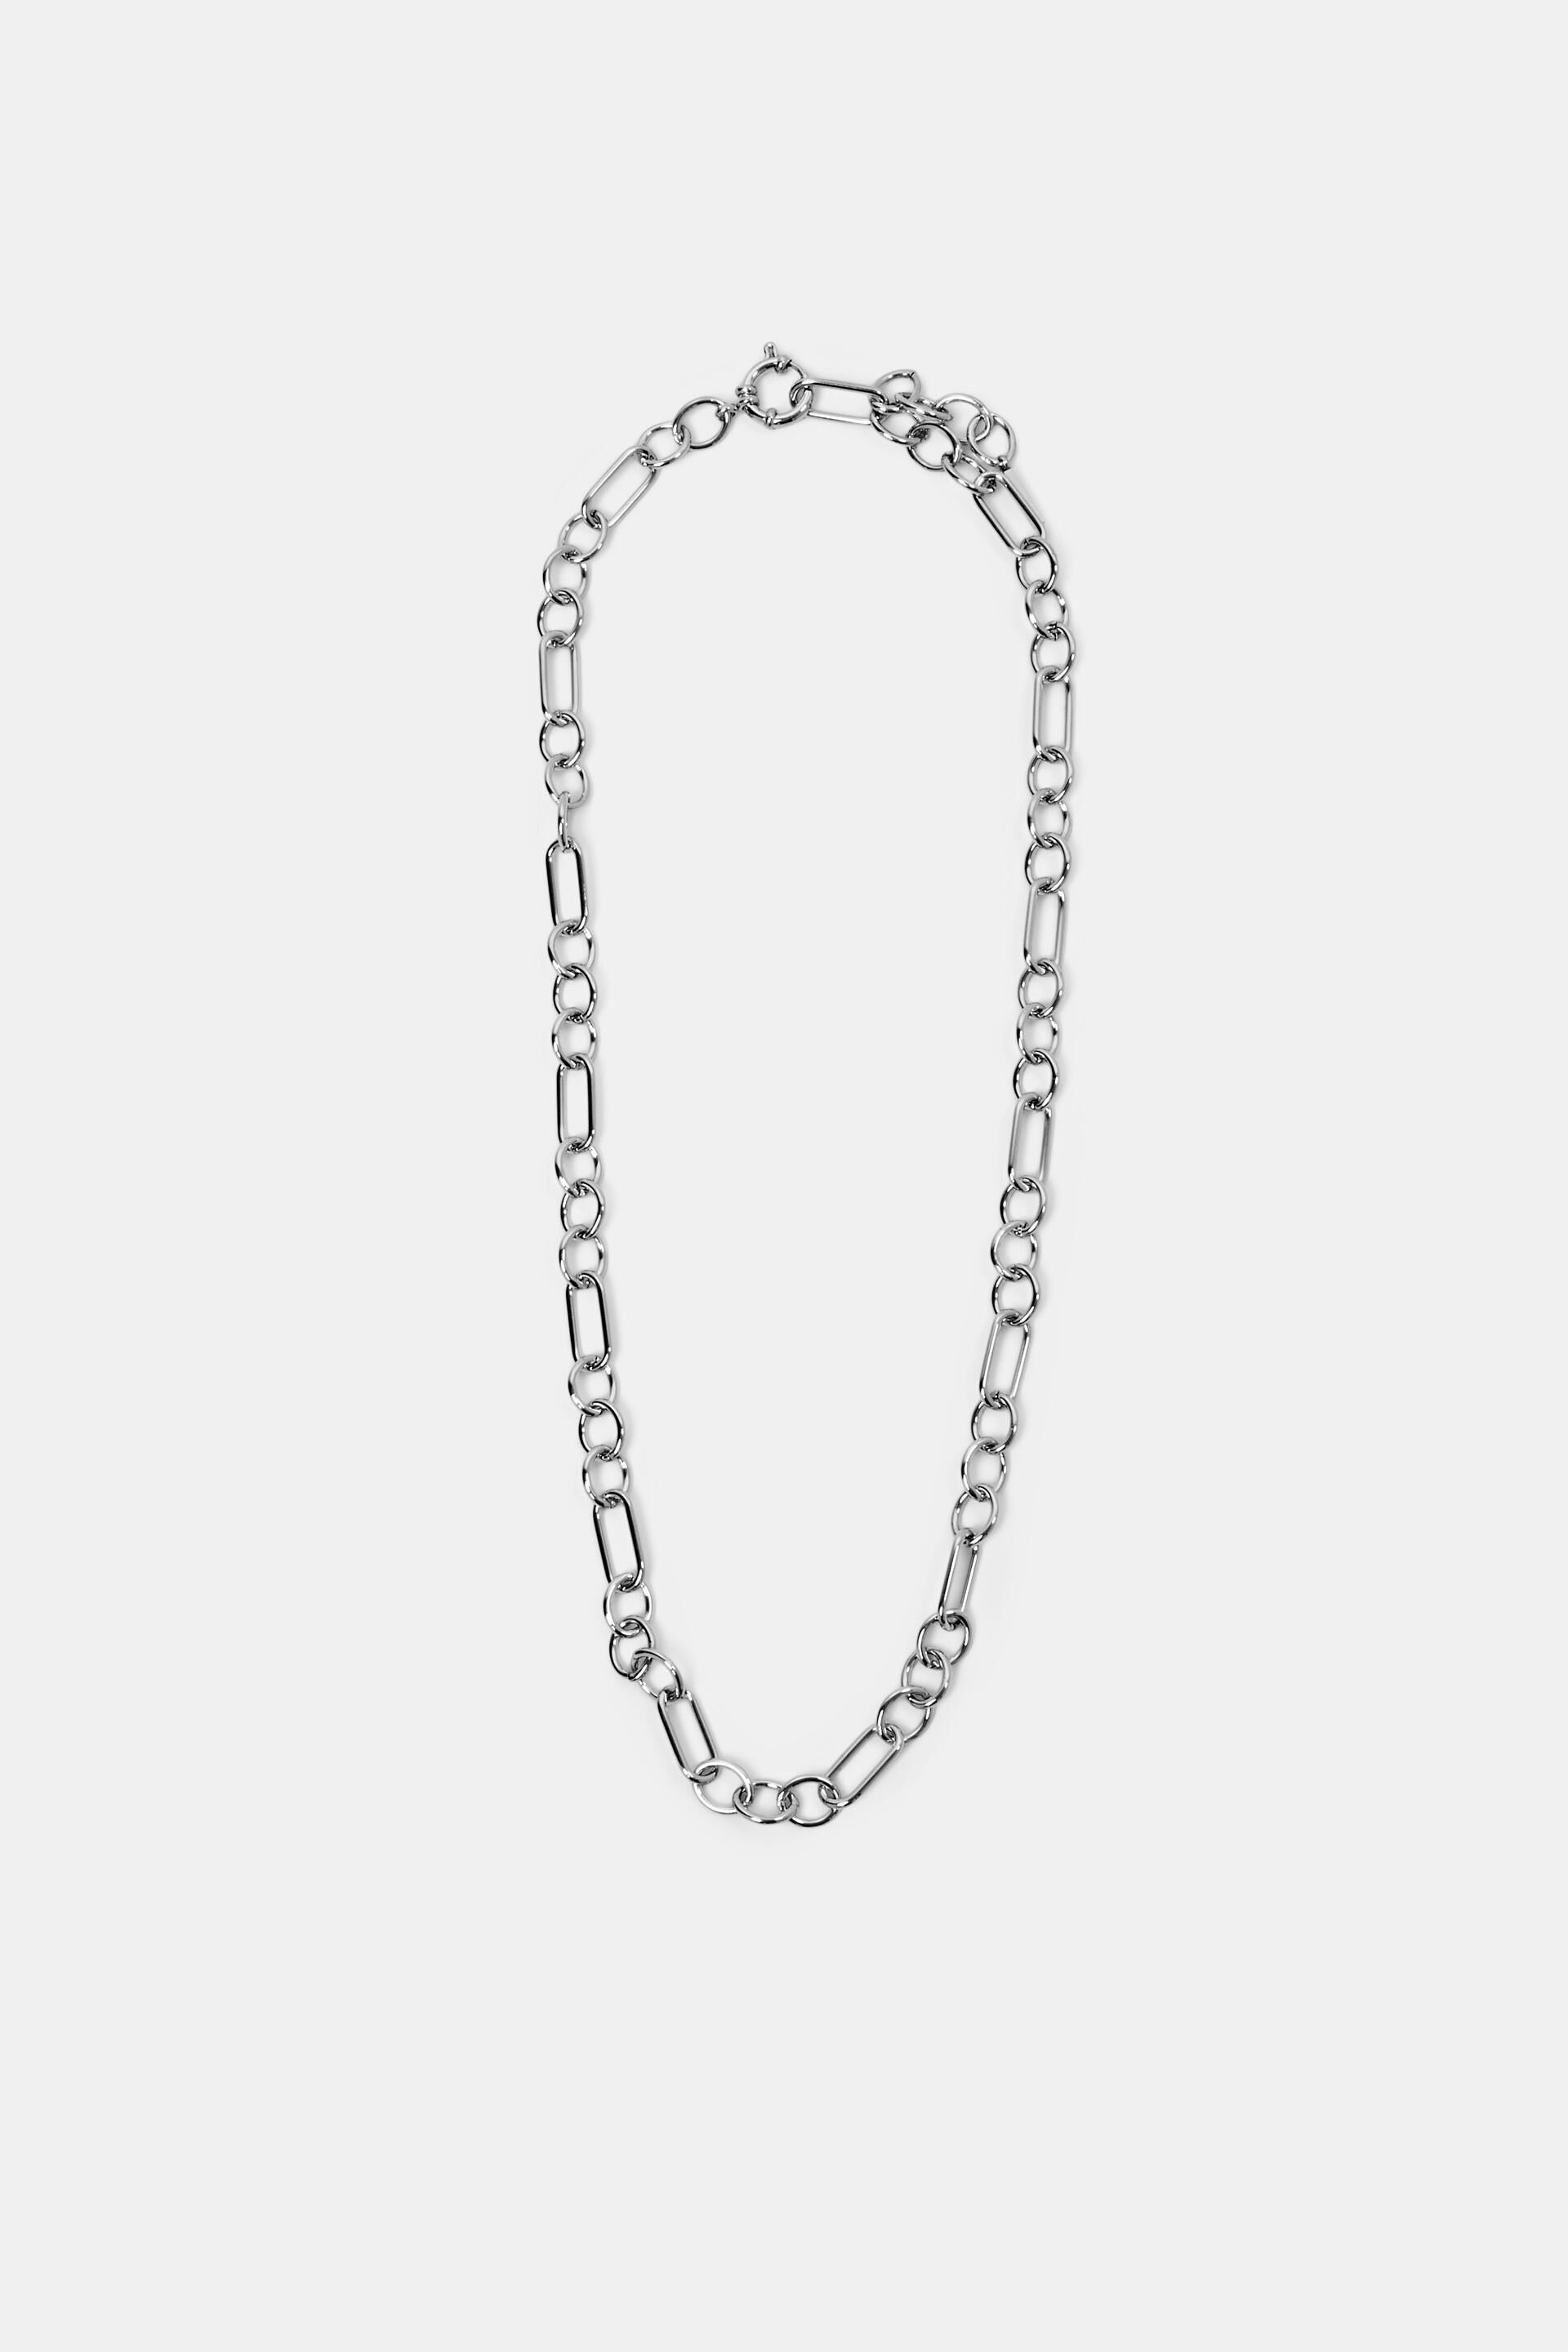 Esprit necklace, steel Chain stainless